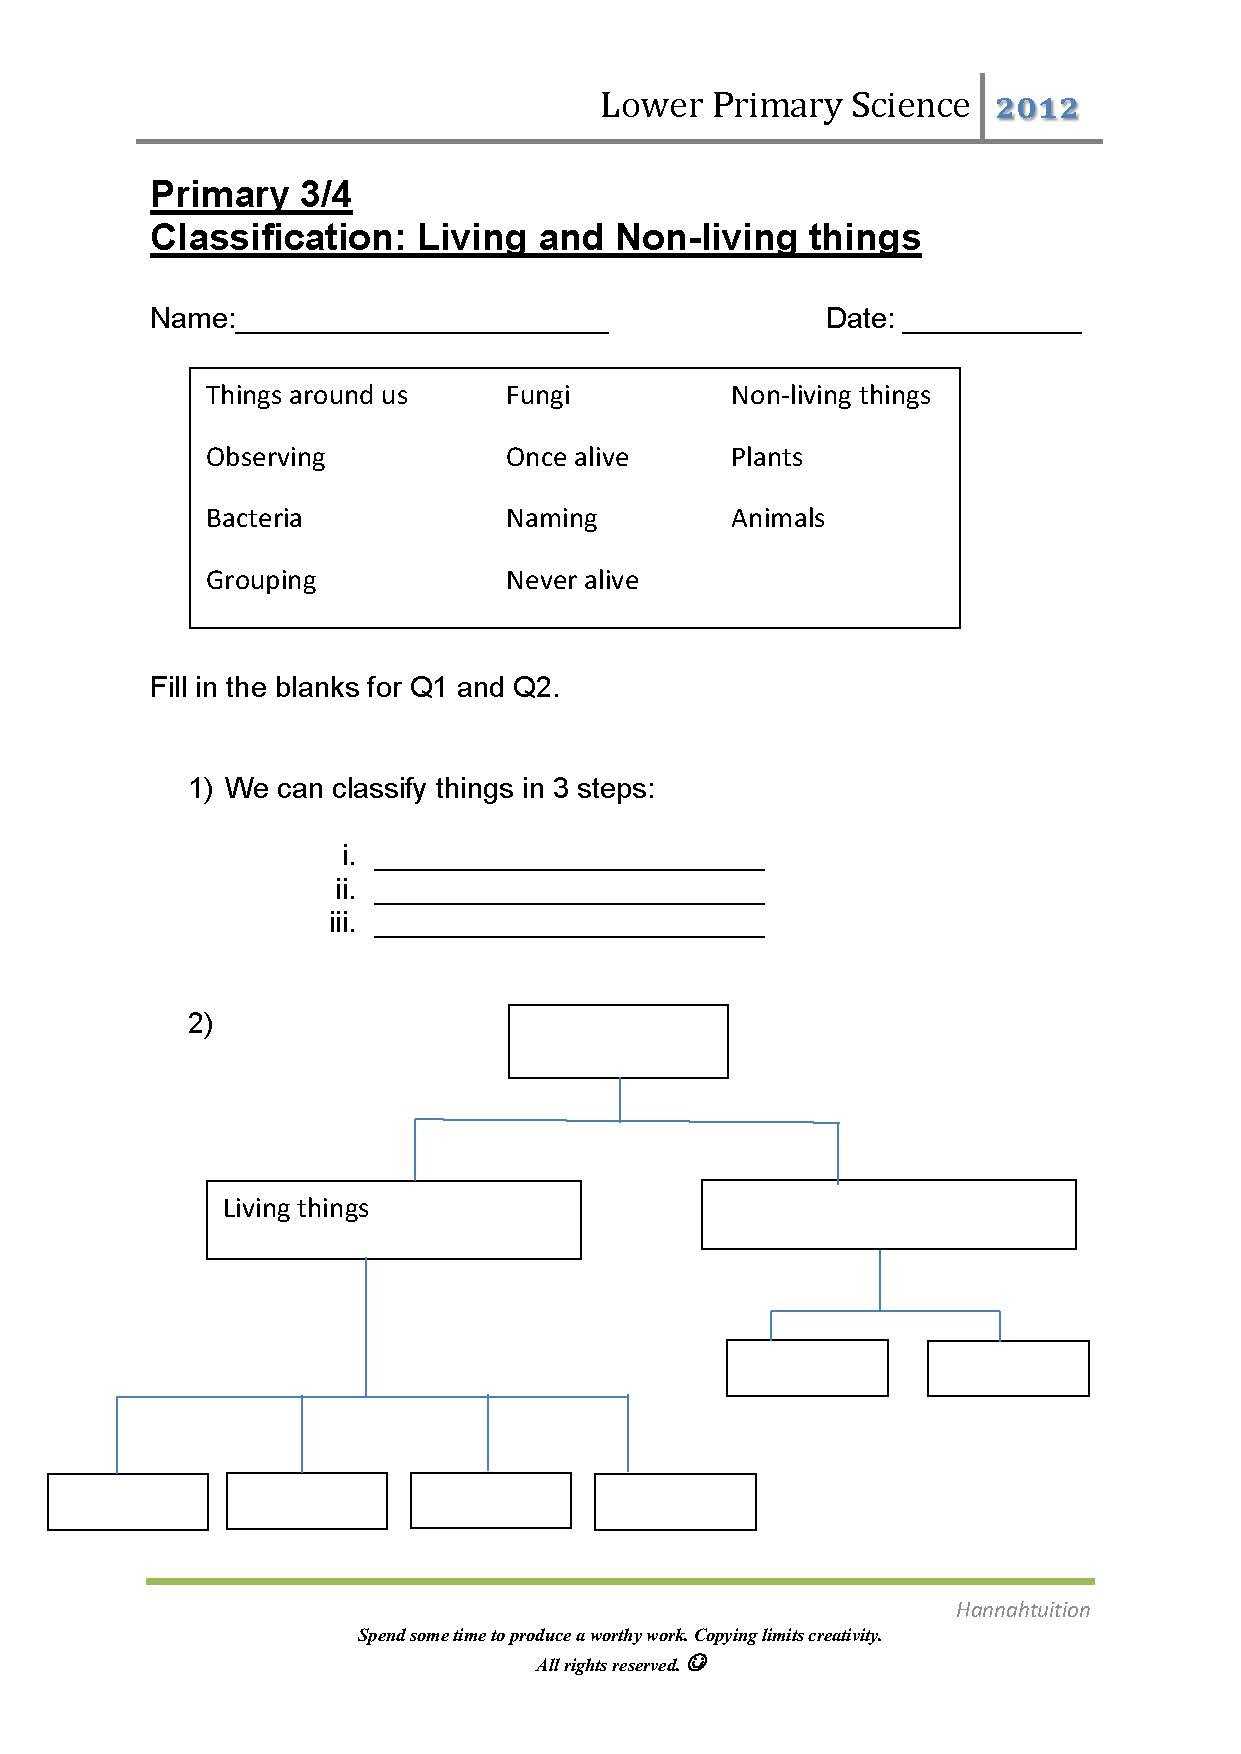 Characteristics Of Bacteria Worksheet Answer Key as Well as Characteristics Living Things Worksheet Gallery Worksheet for